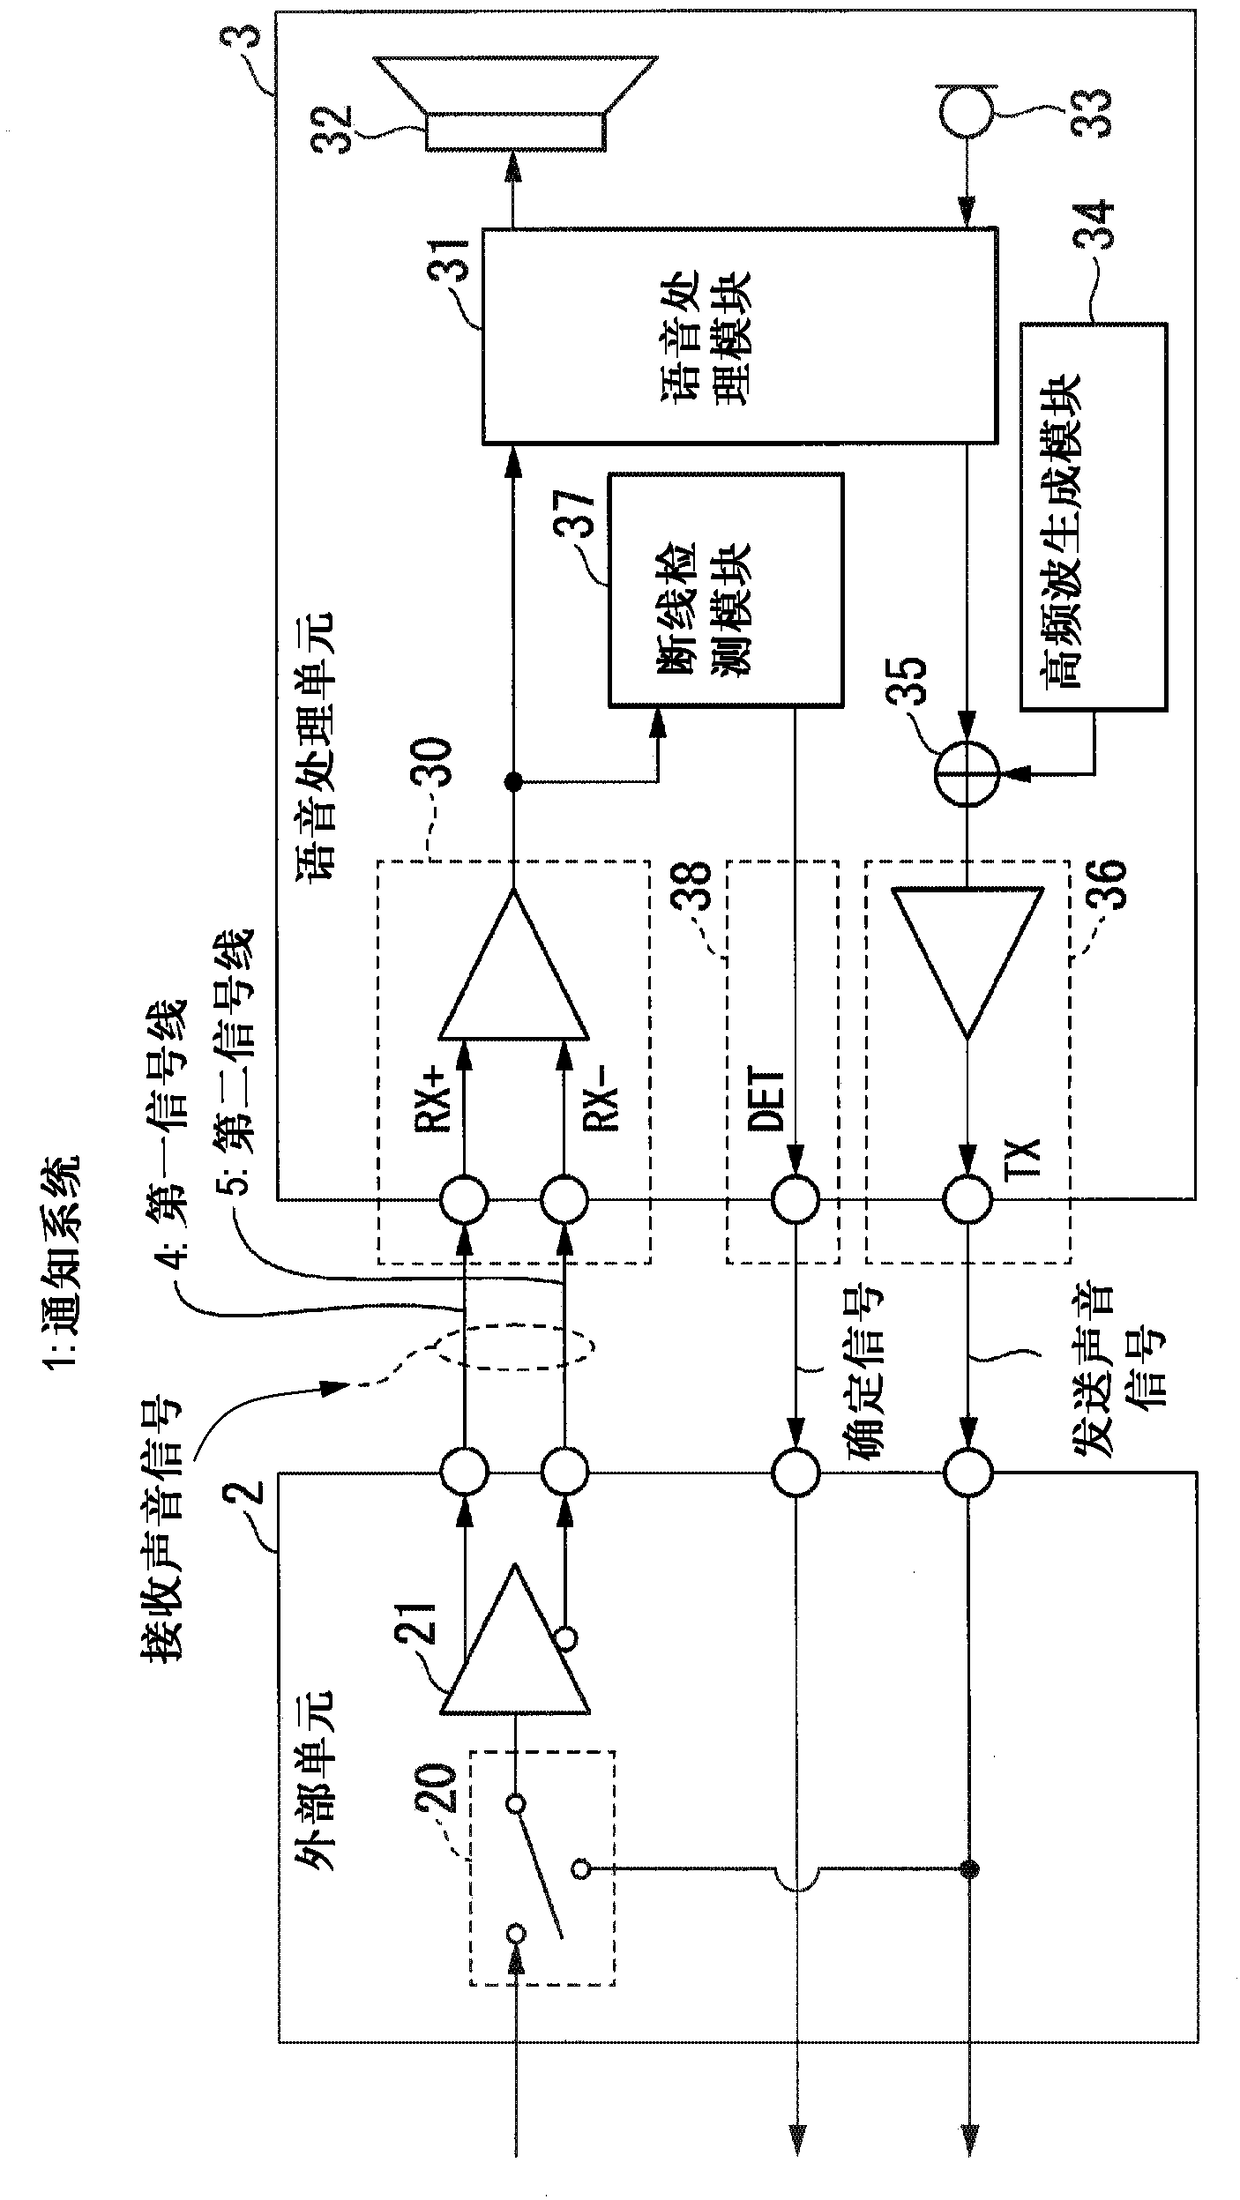 Disconnection detecting device, signal processing unit and disconnection detection method